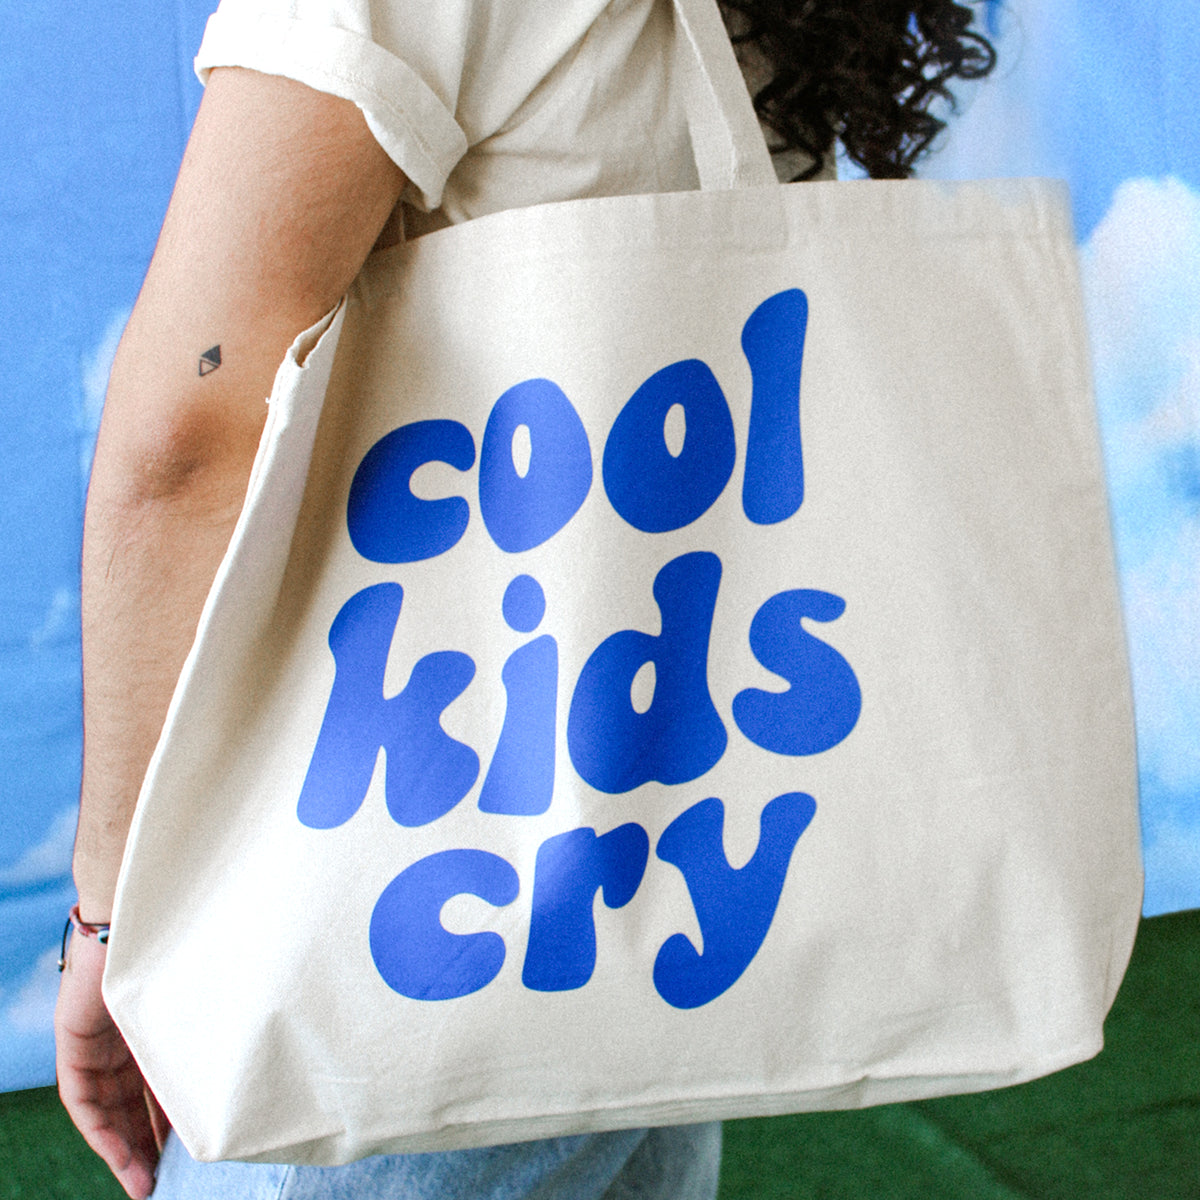 Cool Kids Cry Large Tote Bag | Canvas + Royal Blue